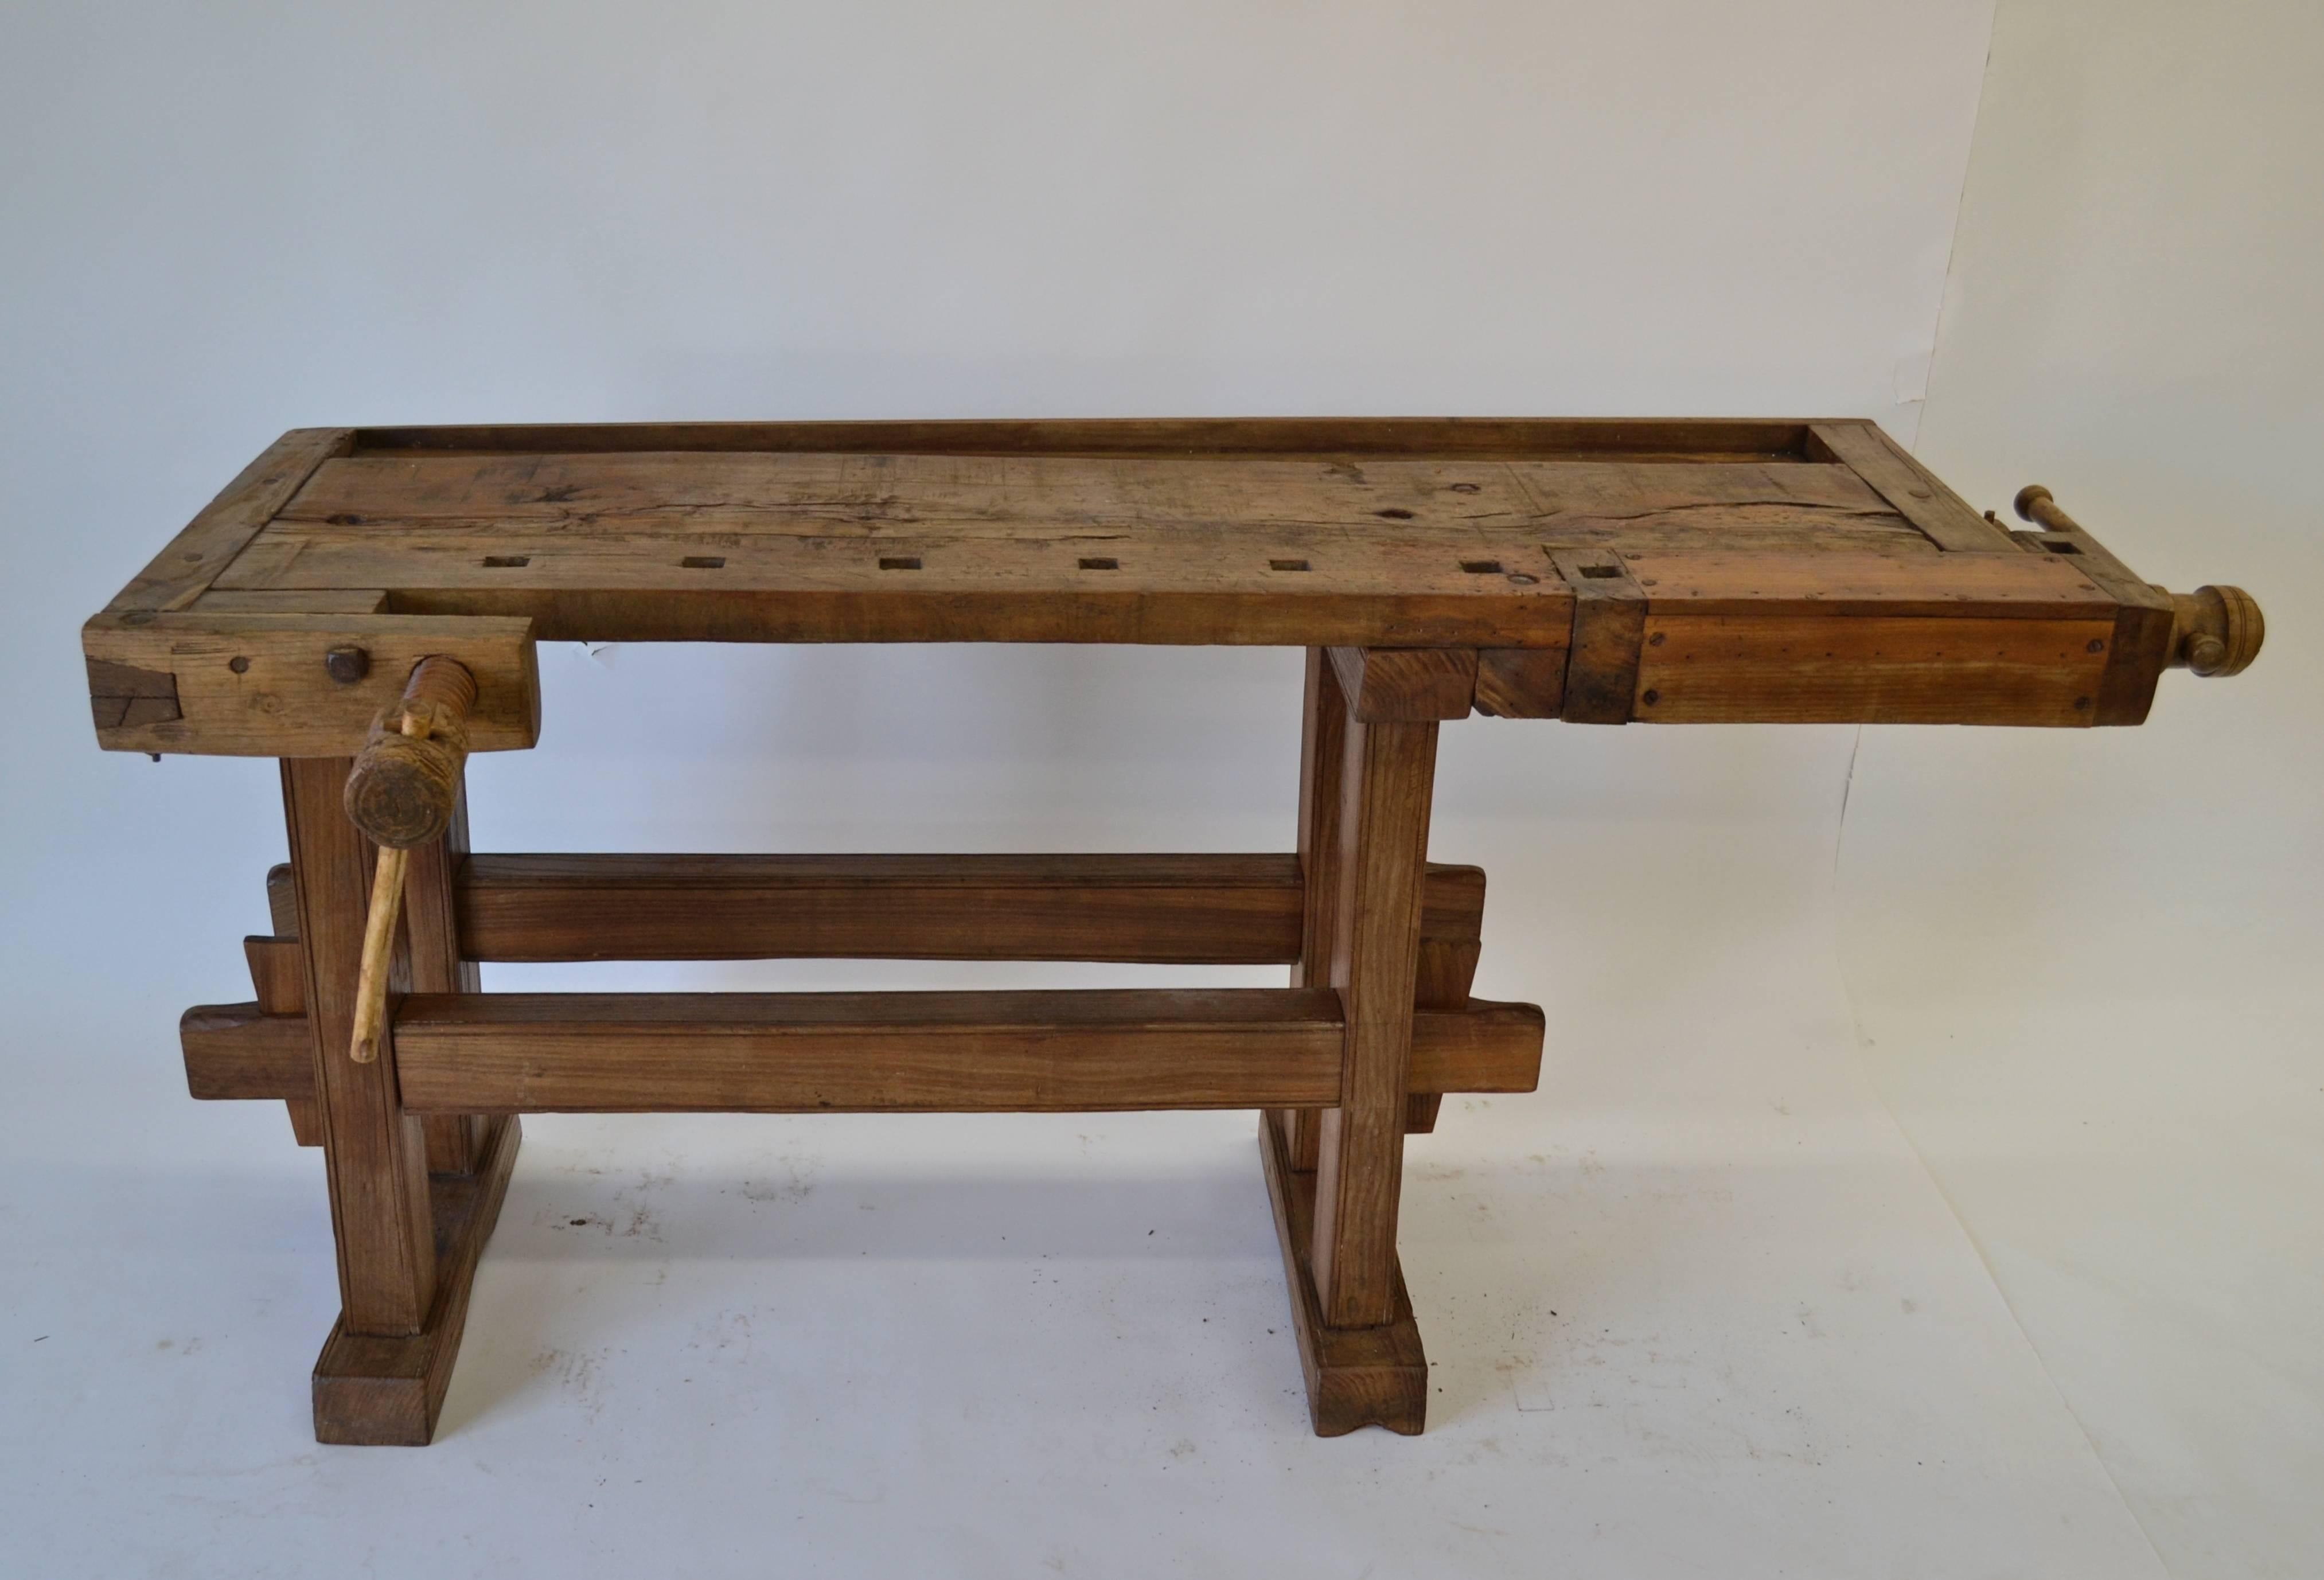 Our workbenches are always good but right now we have some beauties. This one has a 2”oak top with wooden screw turned vises on the front and left hand side. The knock-down base is built to last of 3”by 4” oak posts with incised band decoration, the